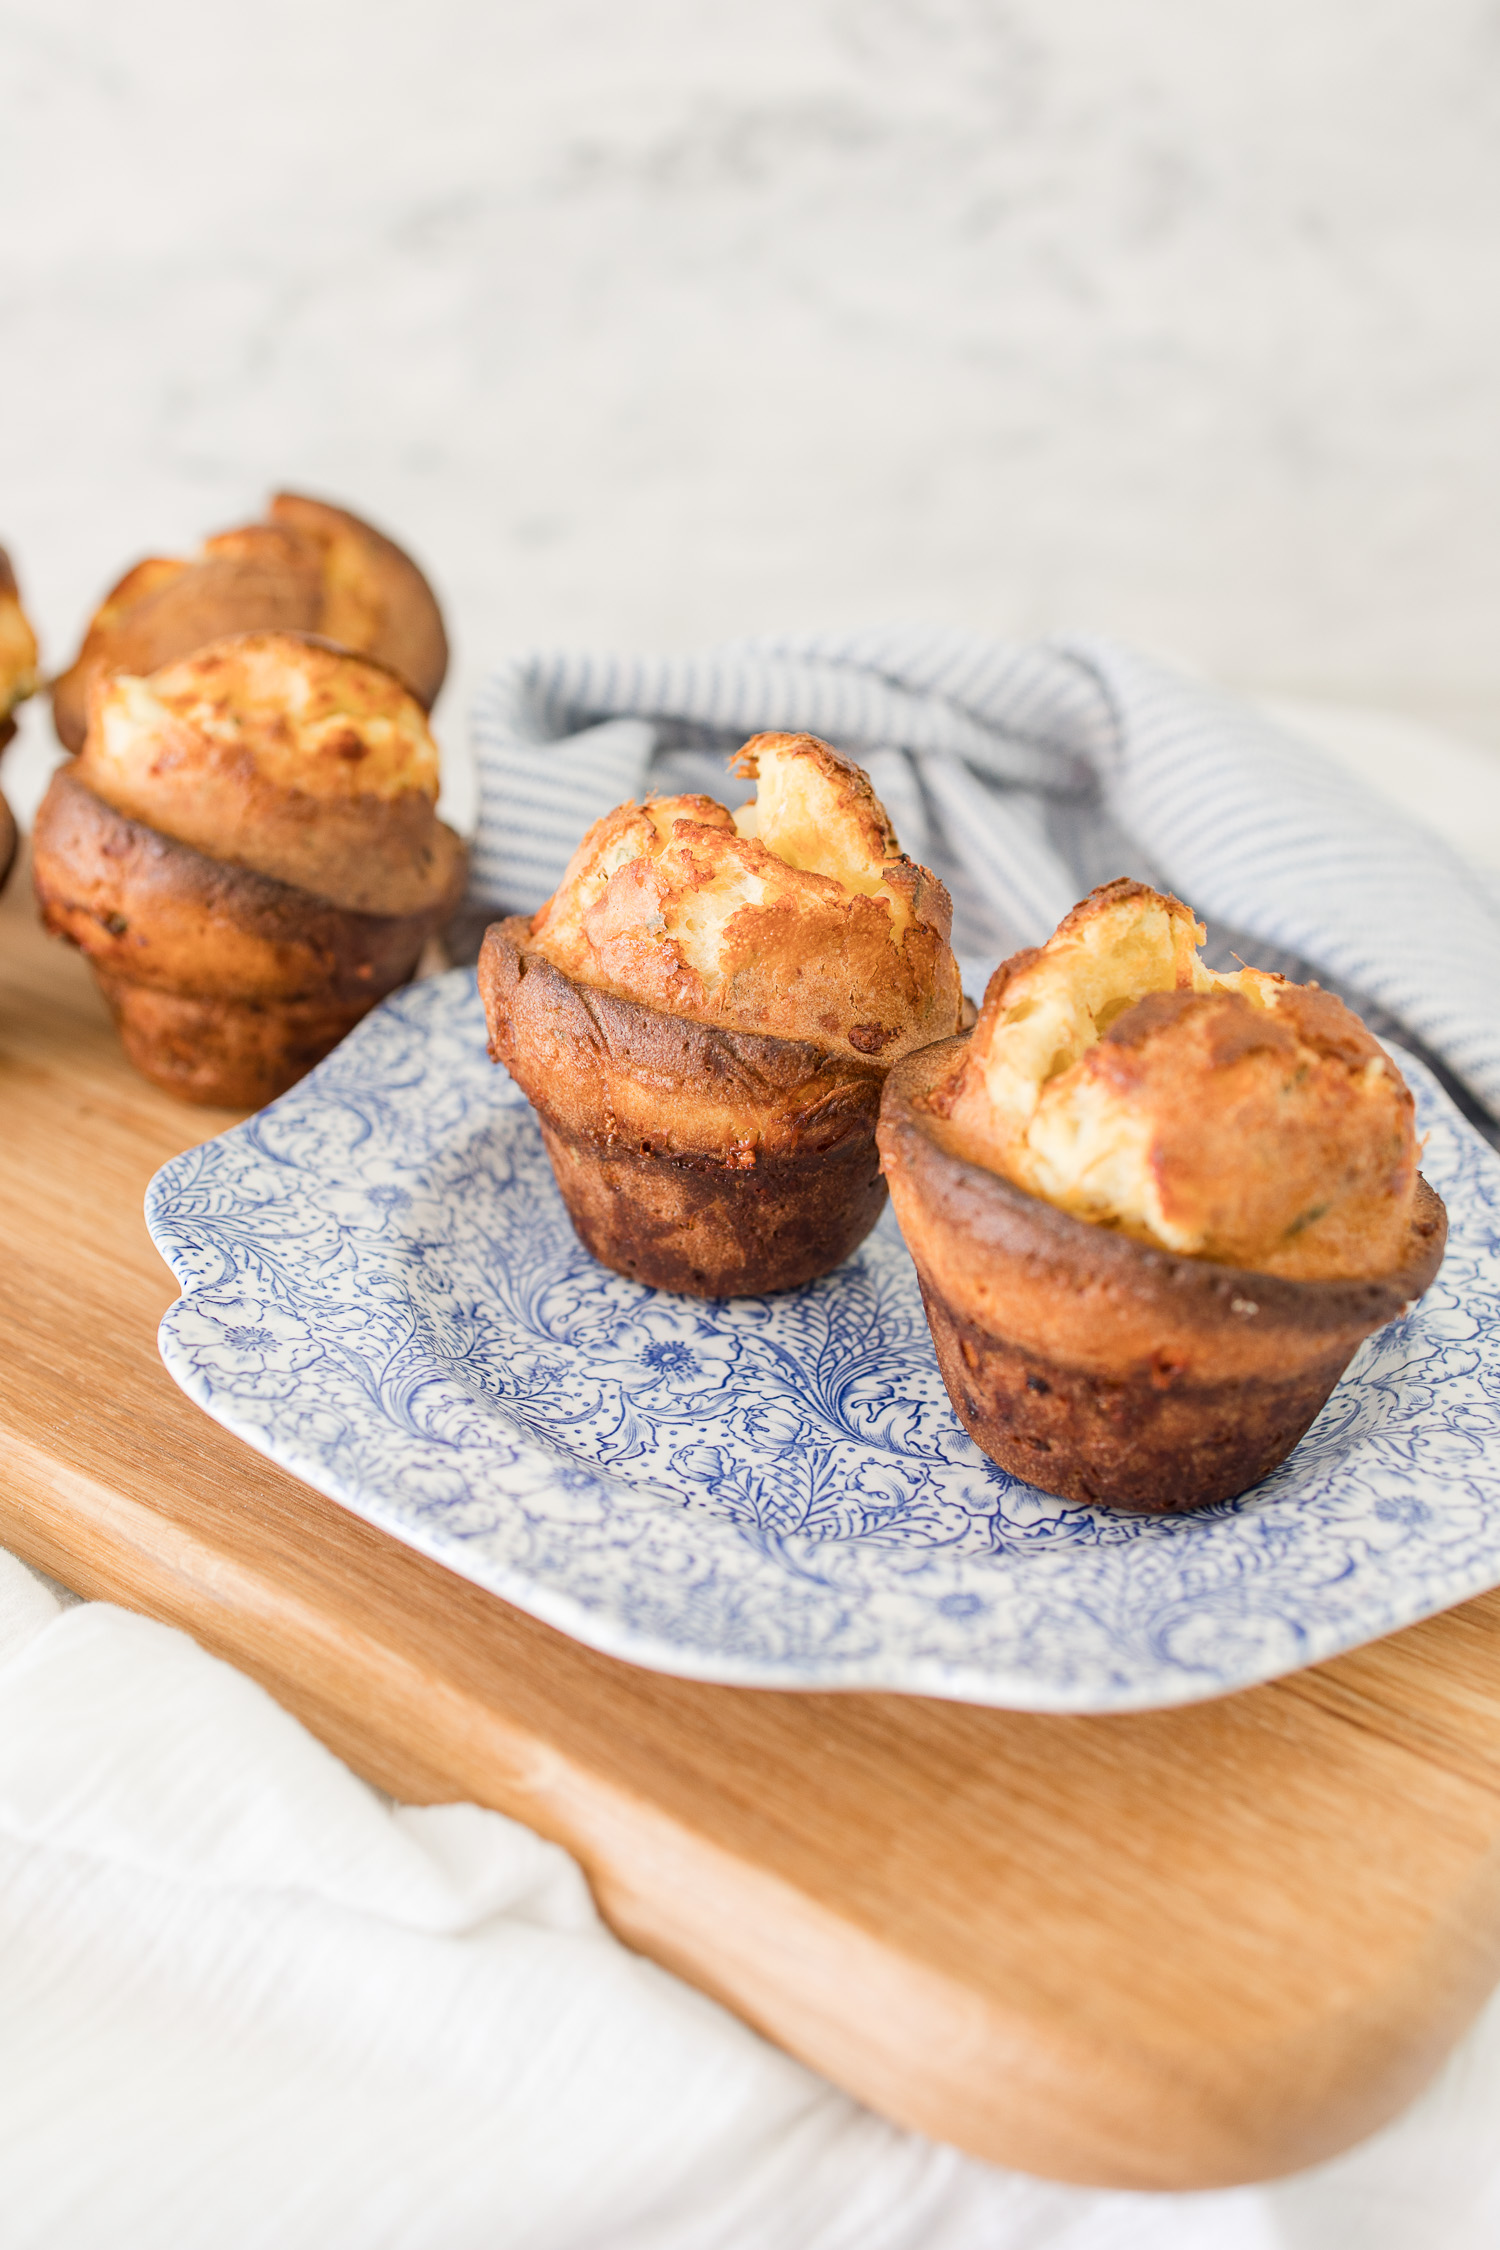 popover on blue floral plate